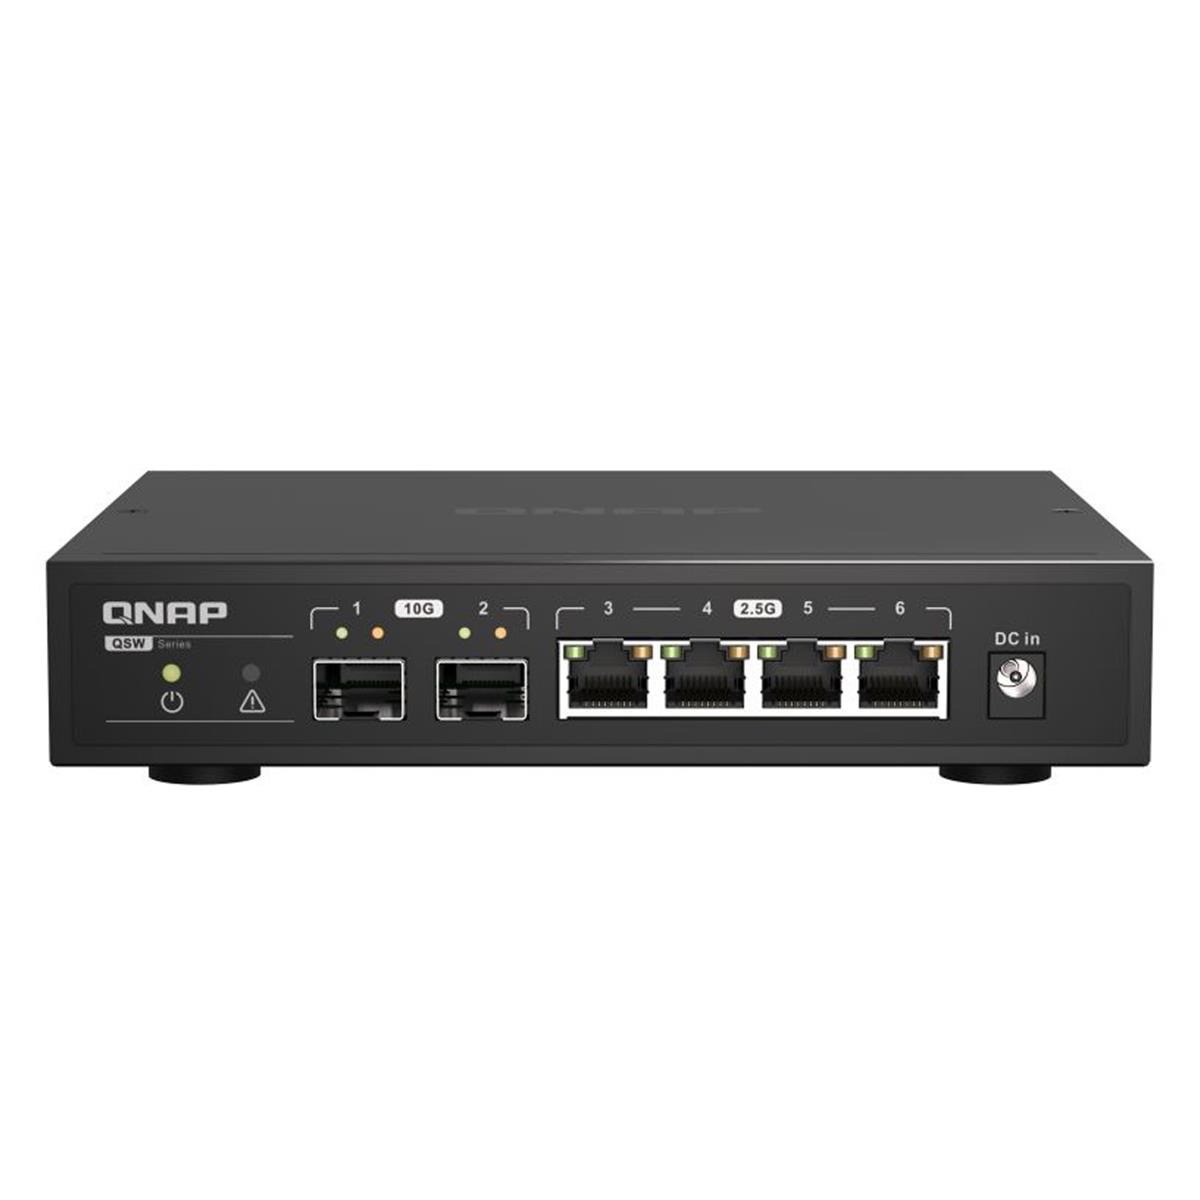 

QNAP Qnap QSW-2104-2S 6-Port Unmanaged Switch w/2x 10GbE SFP+ and 4x 2.5GbE RJ45